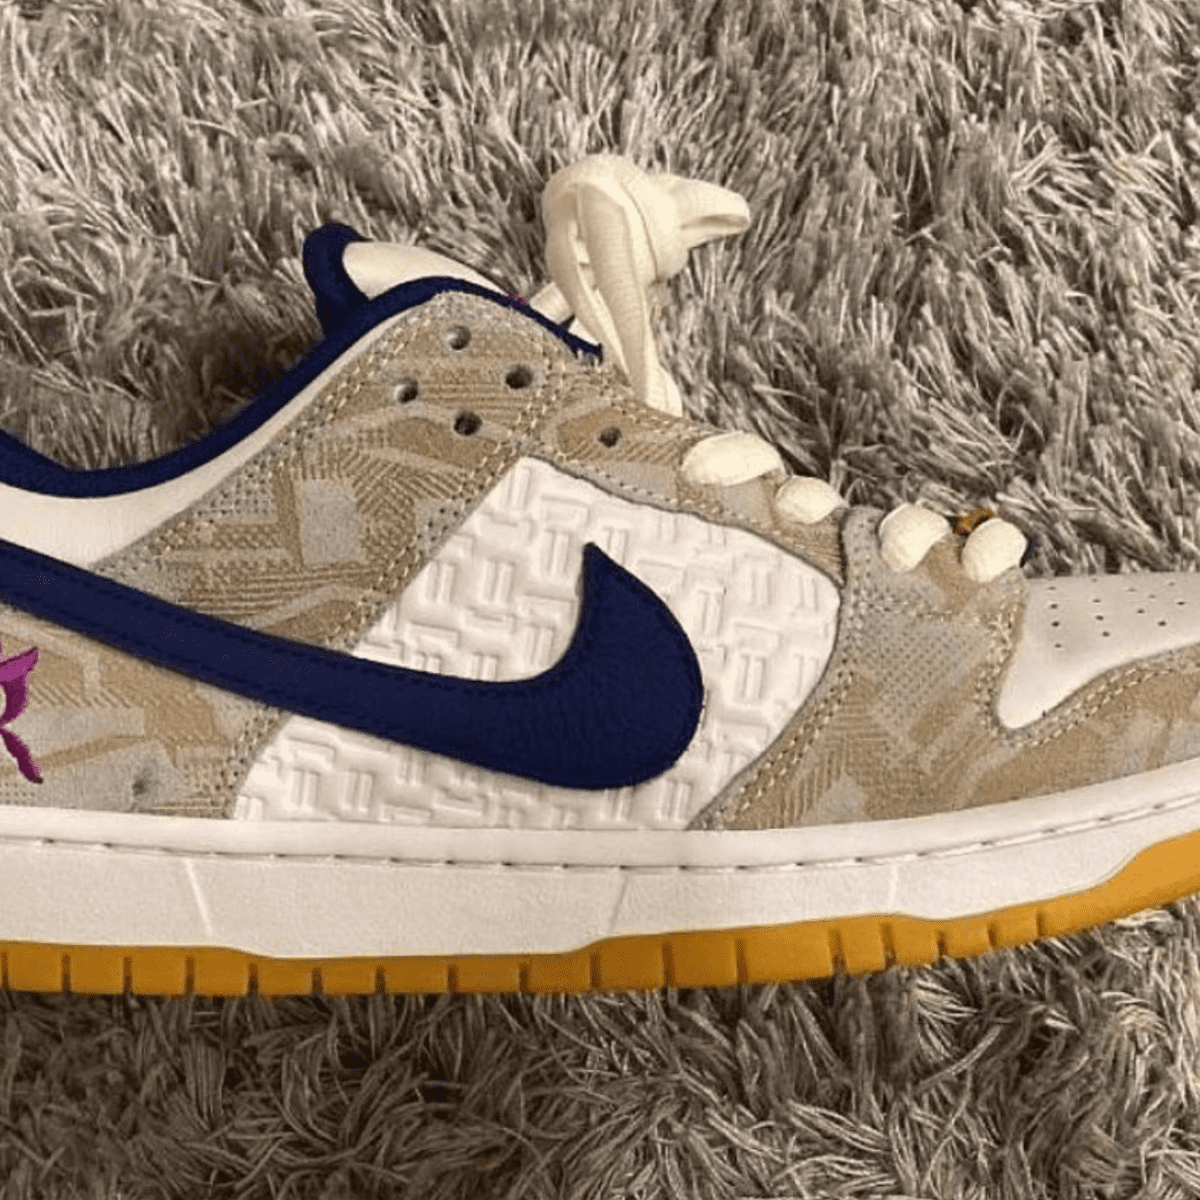 Check out the Rayssa Leal X Nike SB Dunk Low - TransWorld 